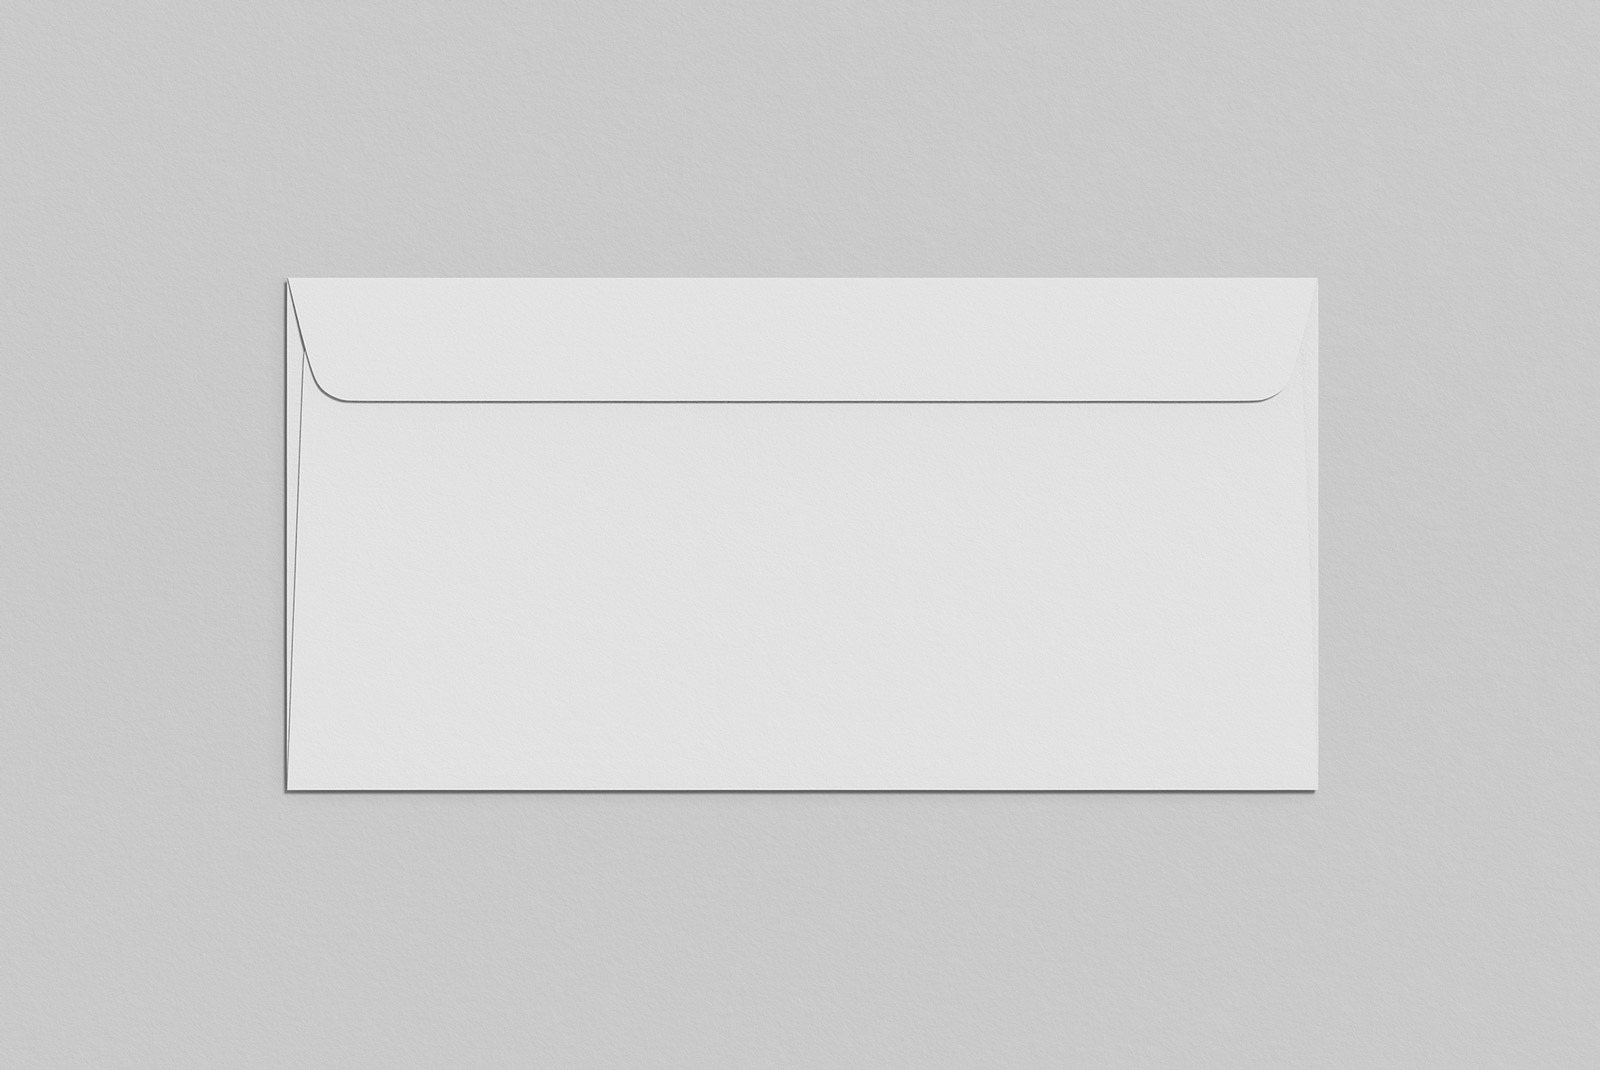 Blank white envelope mockup on a gray background, ideal for presentation design, clean and minimalistic.